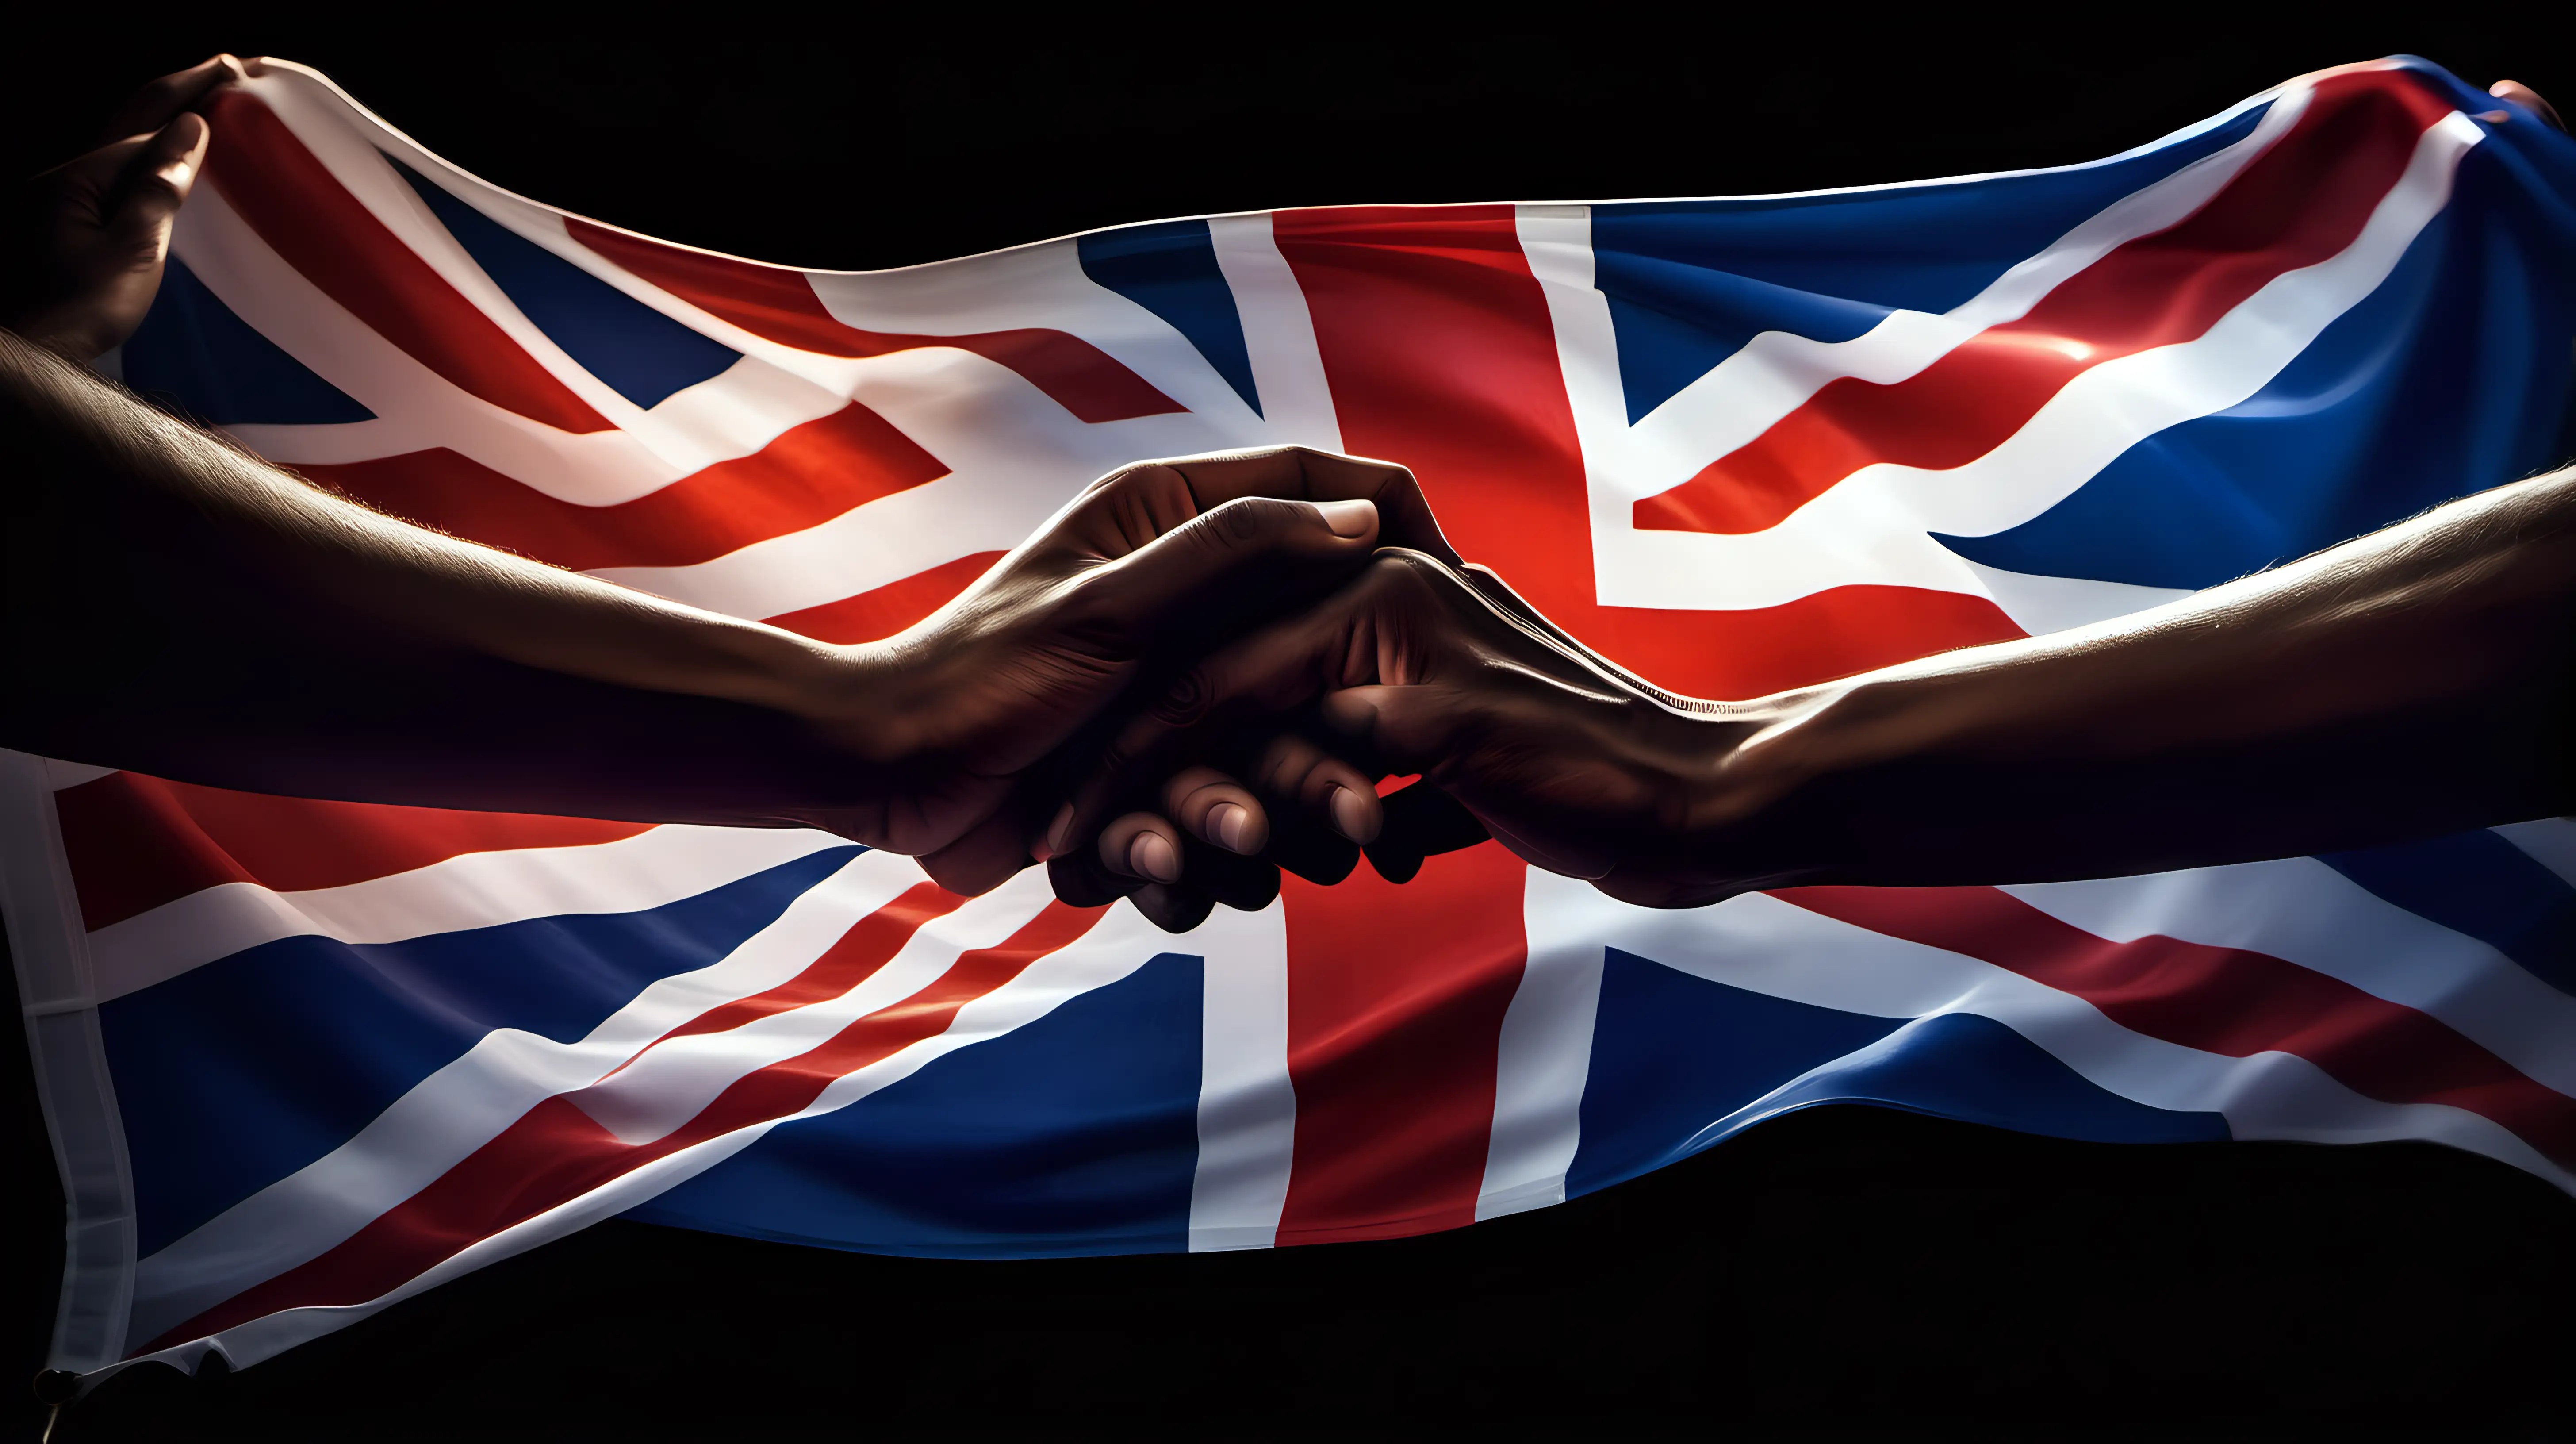 "Glow of allegiance: Zoom in on the hands of an individual as they clutch a radiant United Kingdom flag, the vibrant colors shining brightly against the darkness, echoing their deep love for their homeland."